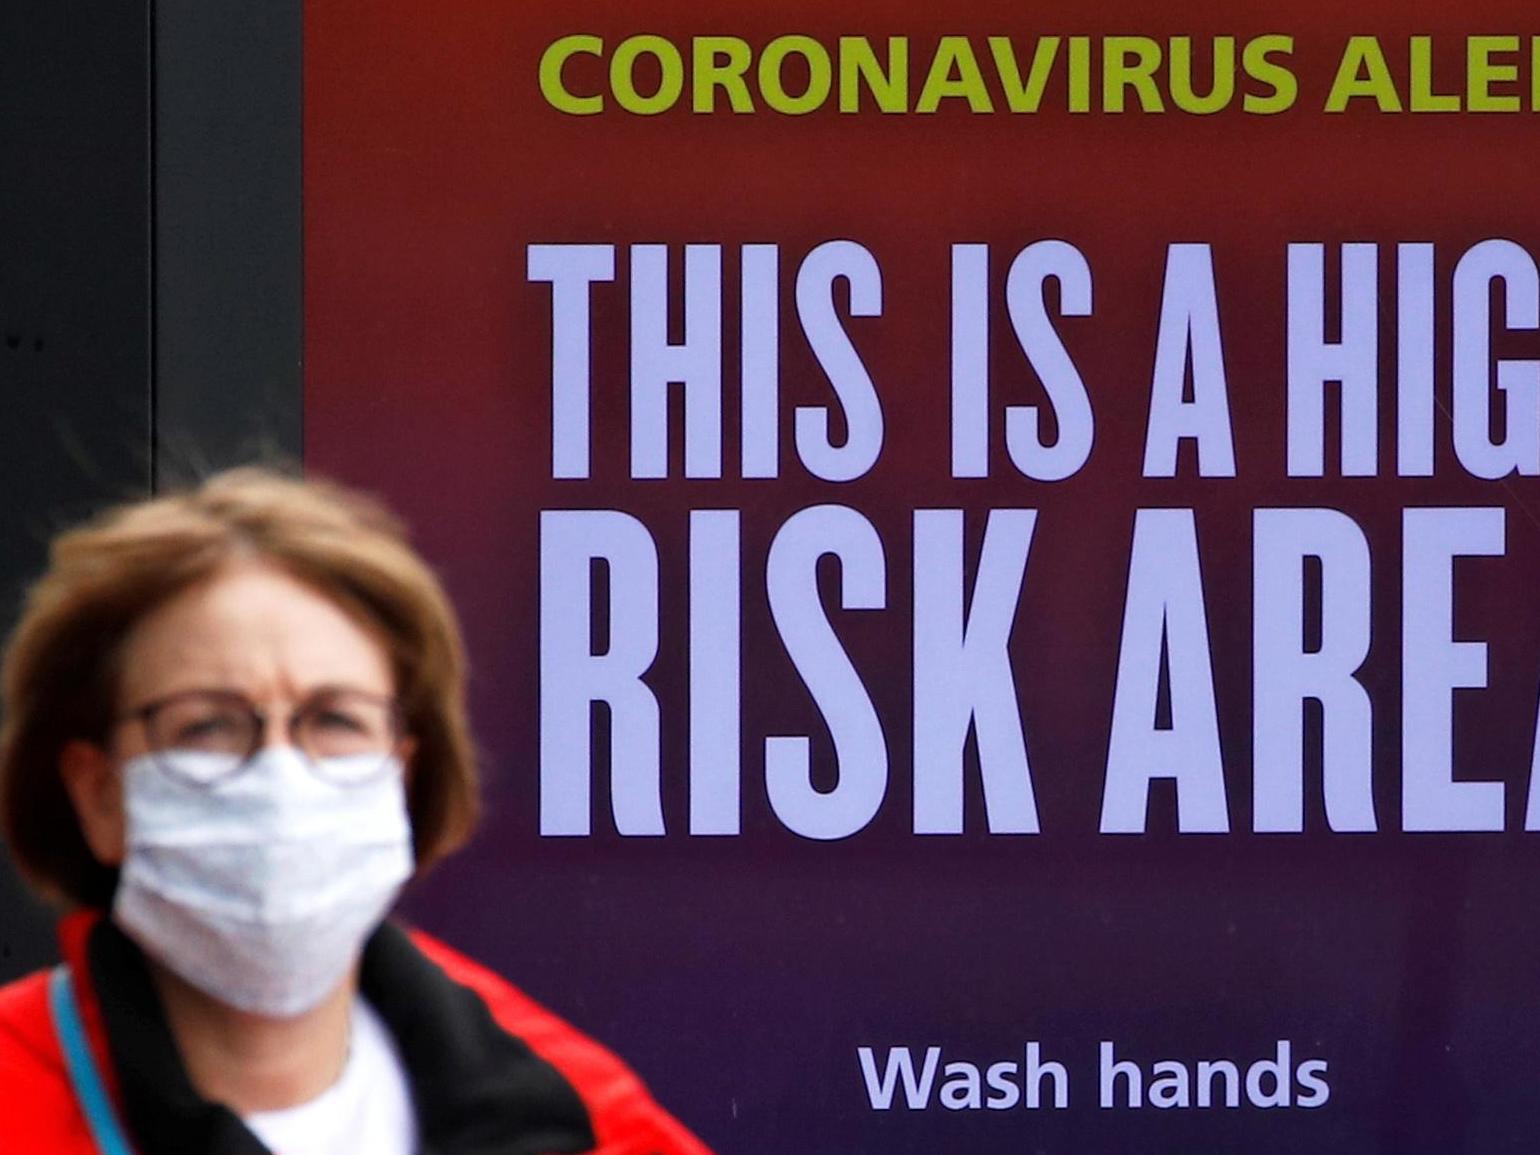 Coronavirus: Face masks reduce severity of symptoms in wearer, scientists find - The Independent